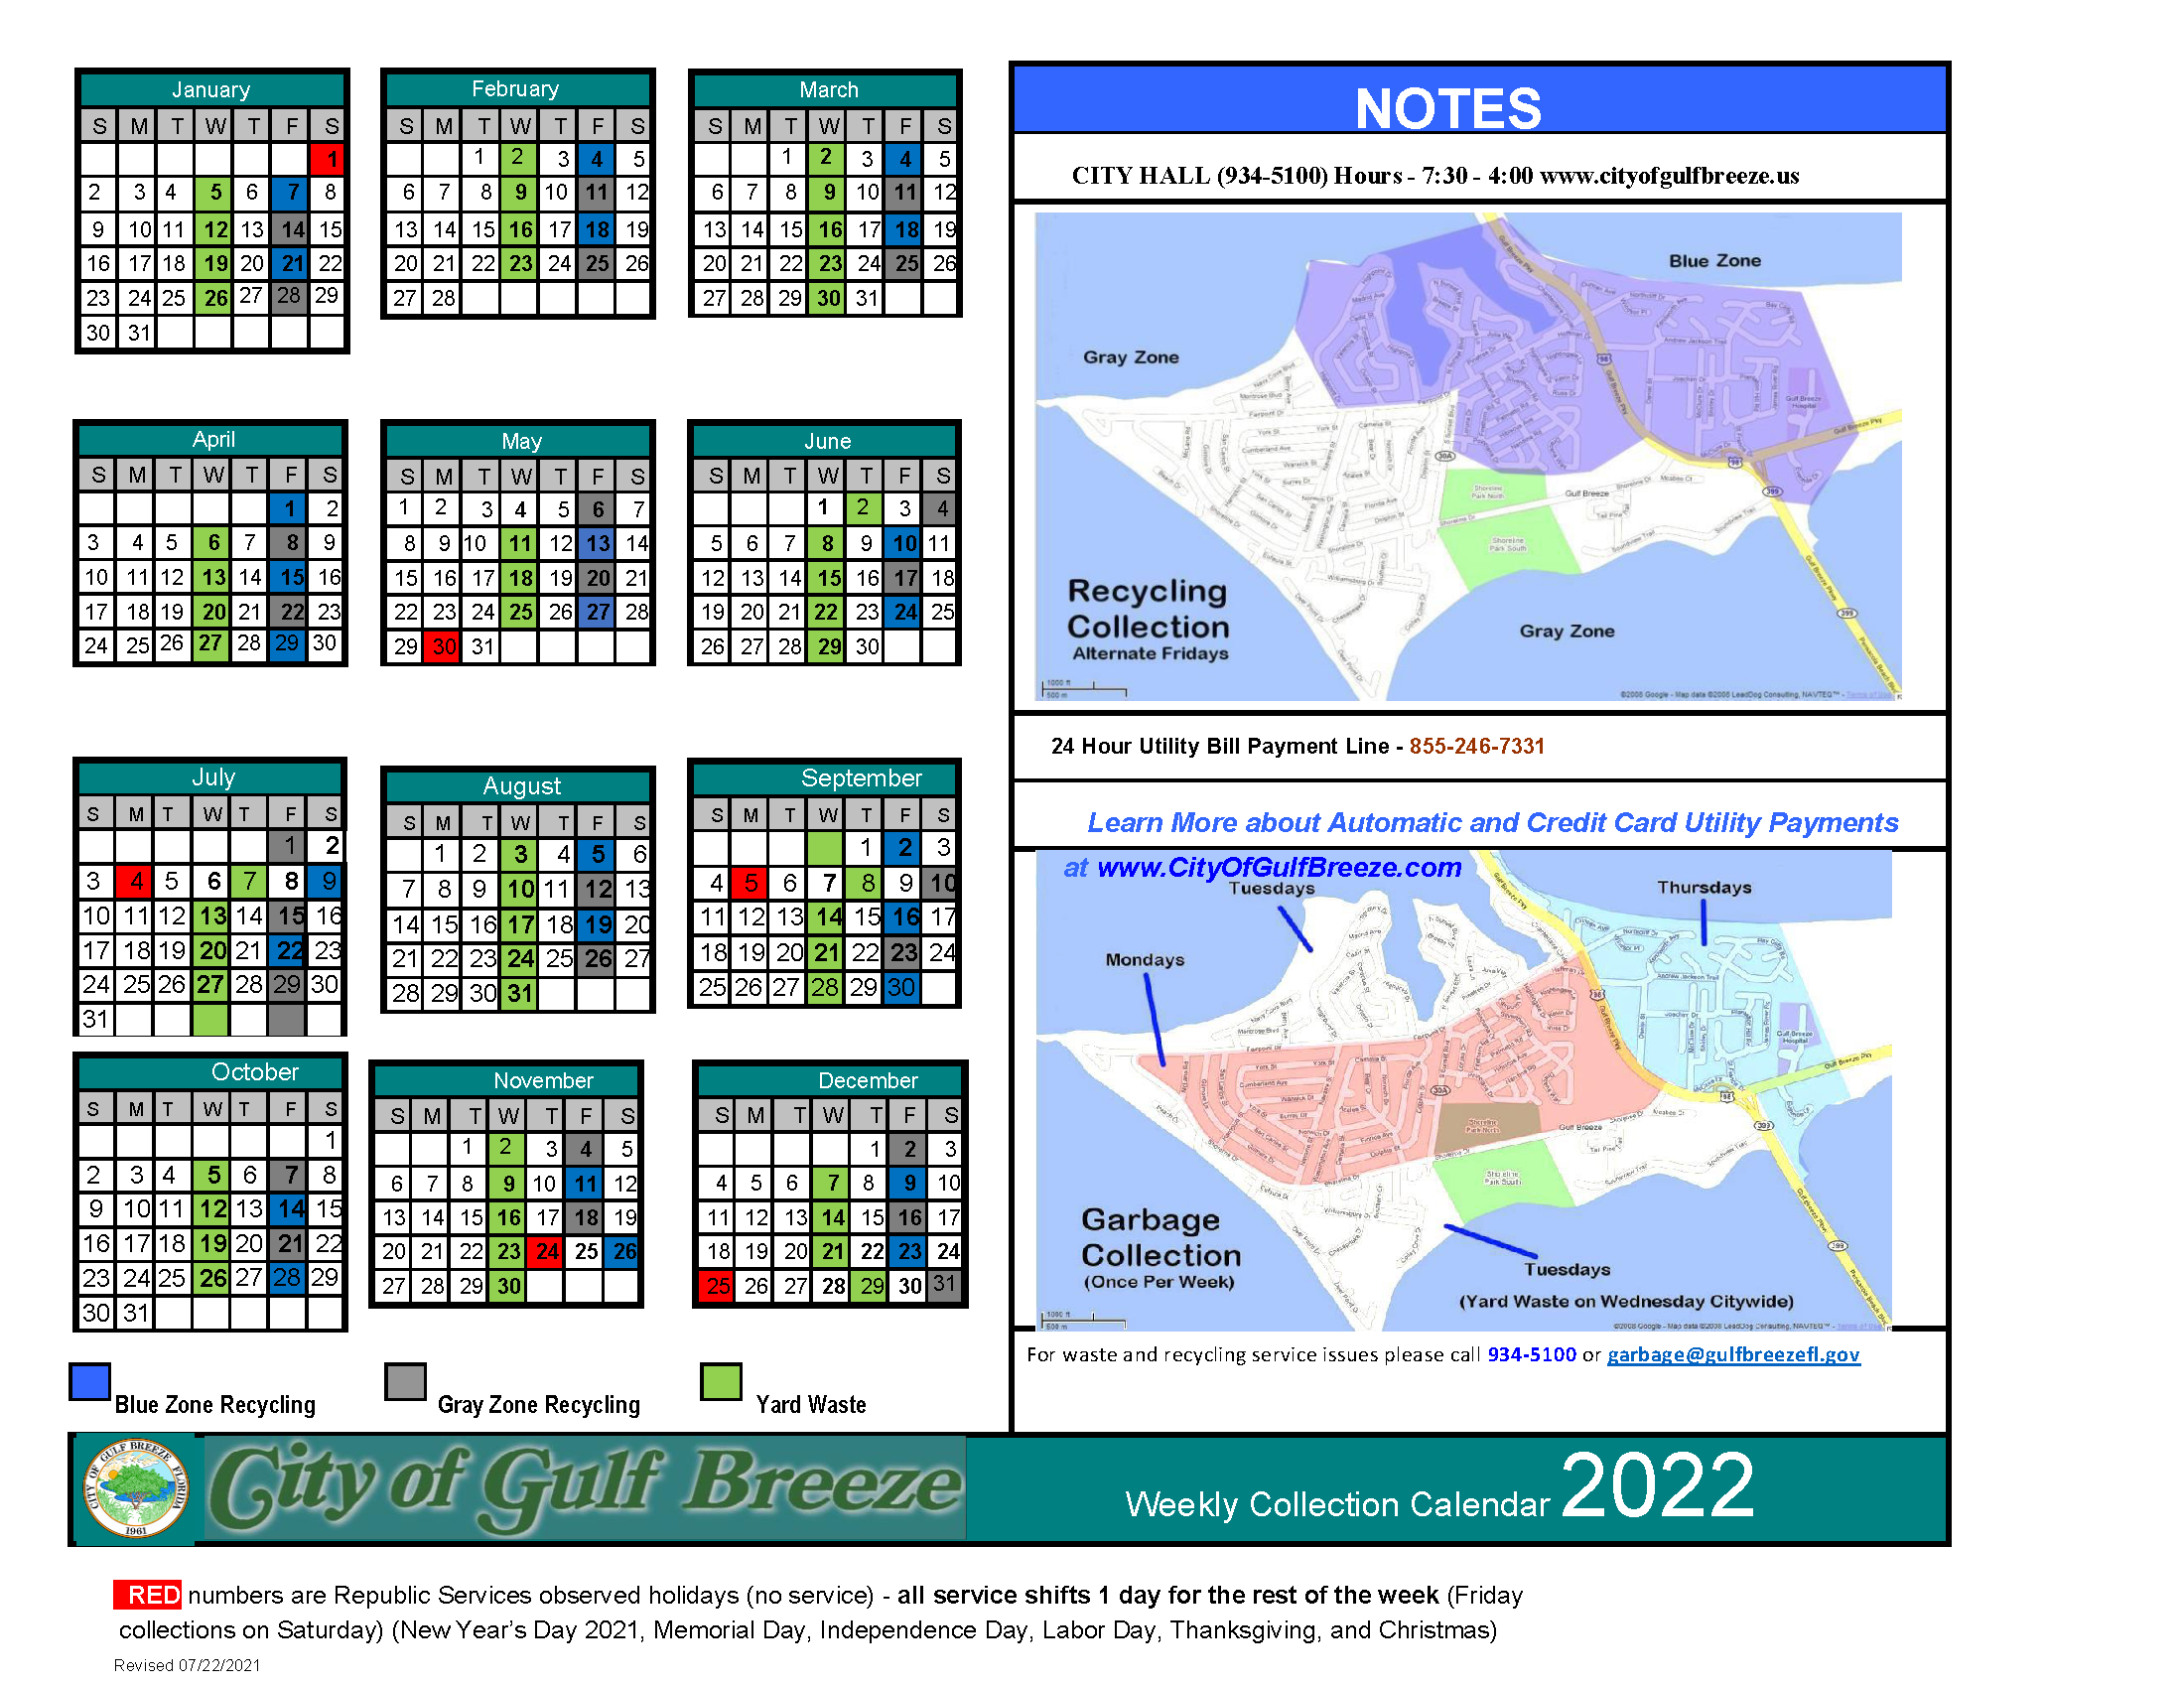 Picture of 12 month calendar and map of the City color-coded by zone. The calendar has listed the days in which garbage, yard waste and recycling will be picked up and corresponds to the map with zones outlined.